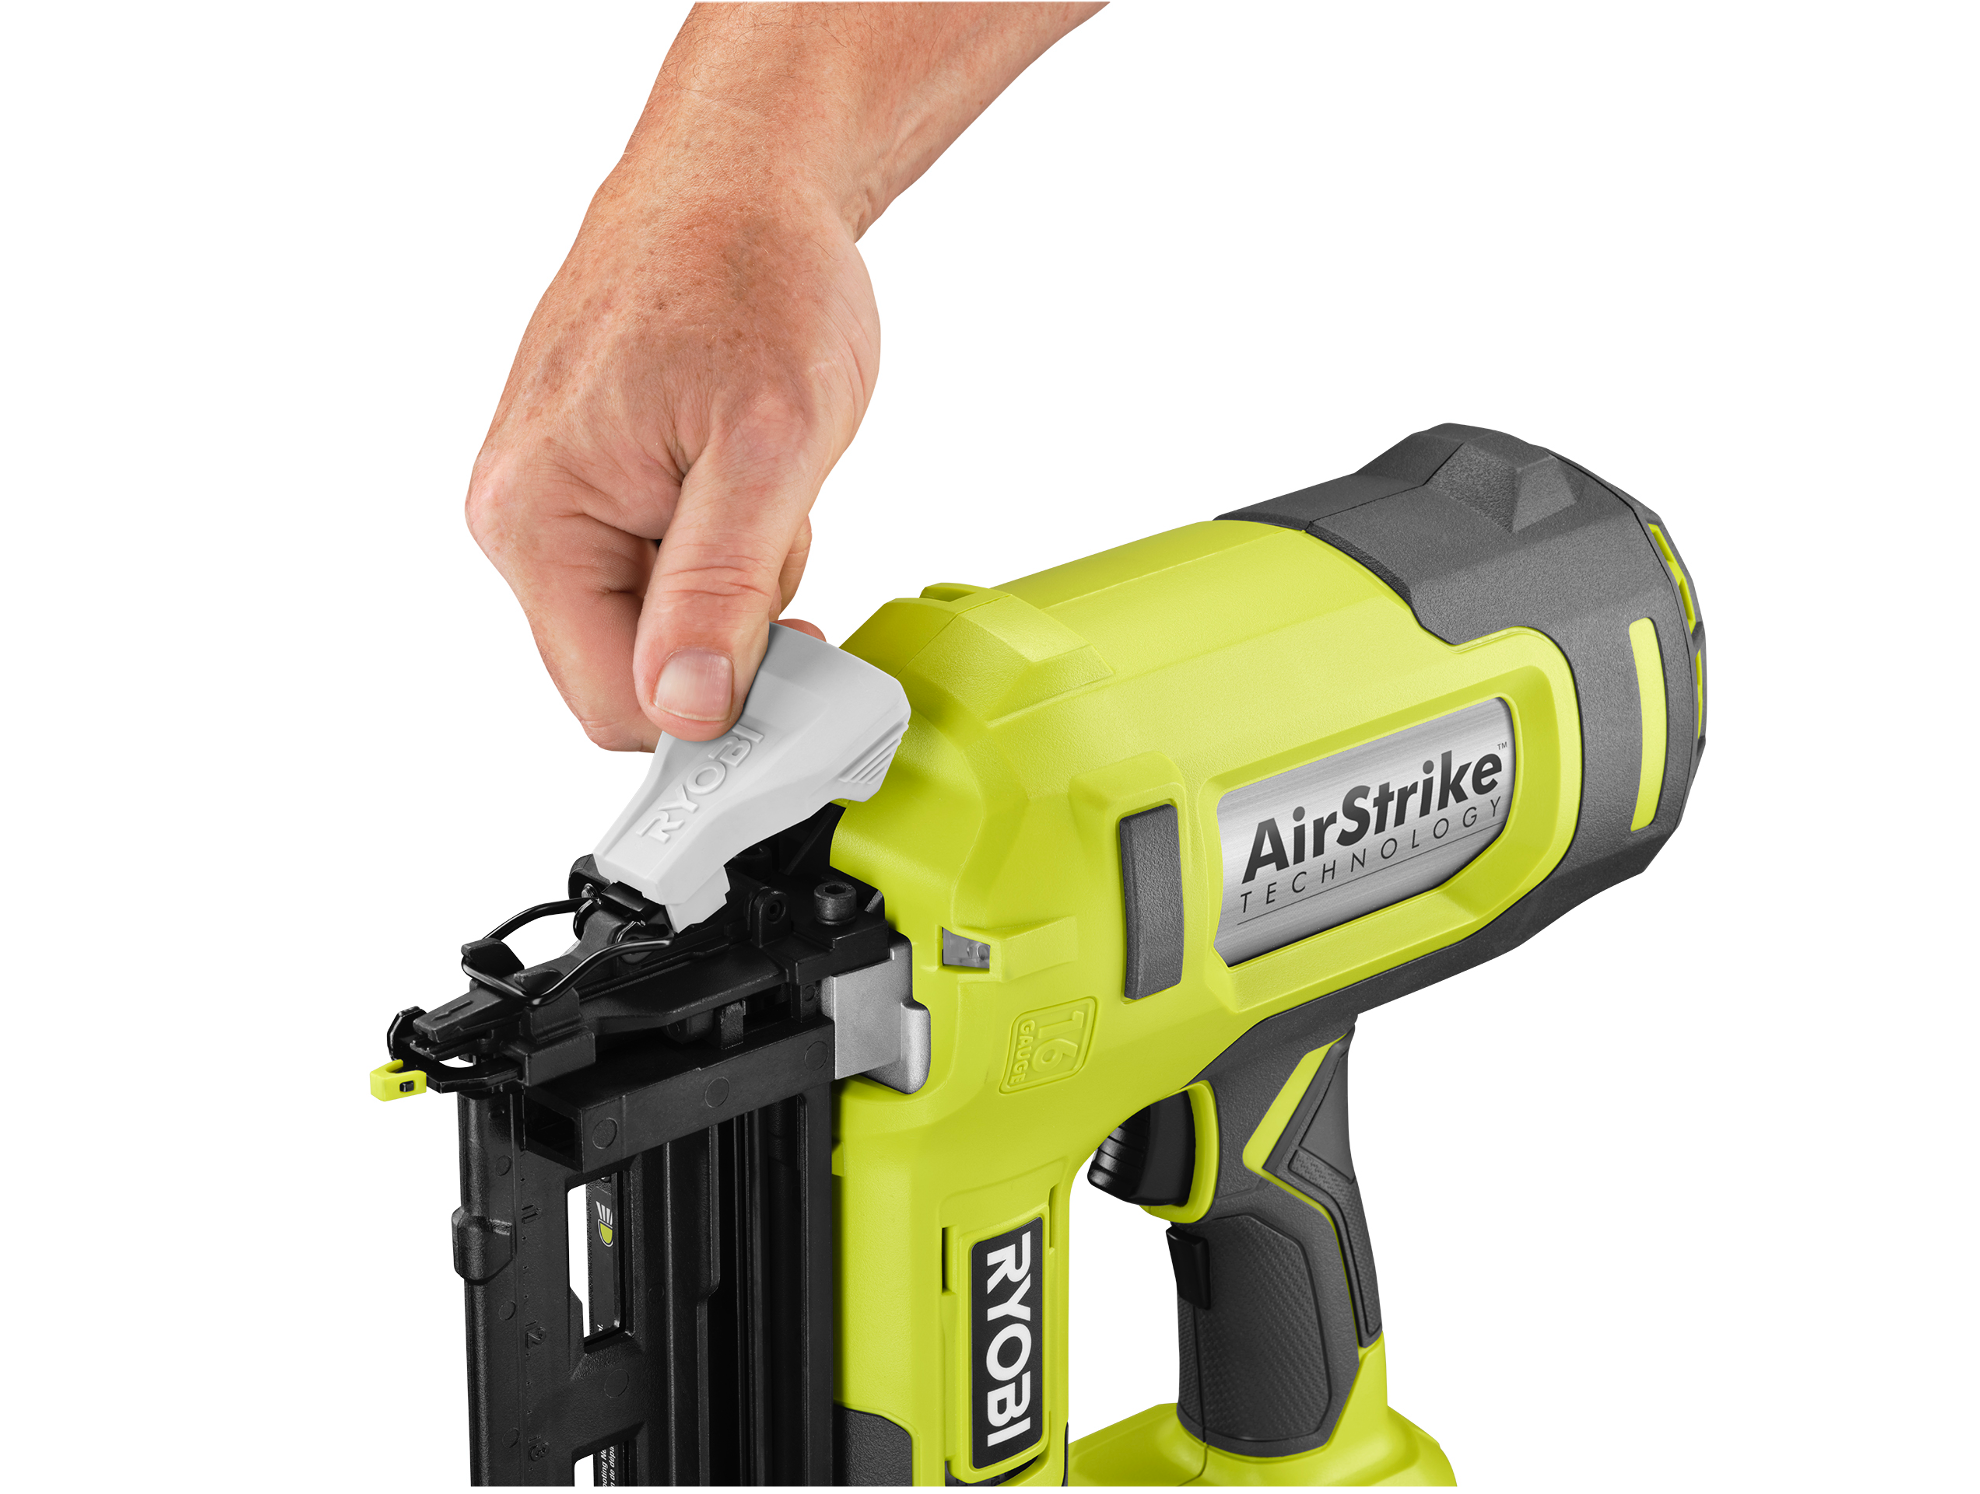 Product Features Image for 18V ONE+ AIRSTRIKE 16GA FINISH NAILER KIT (BATTERY AND CHARGER).